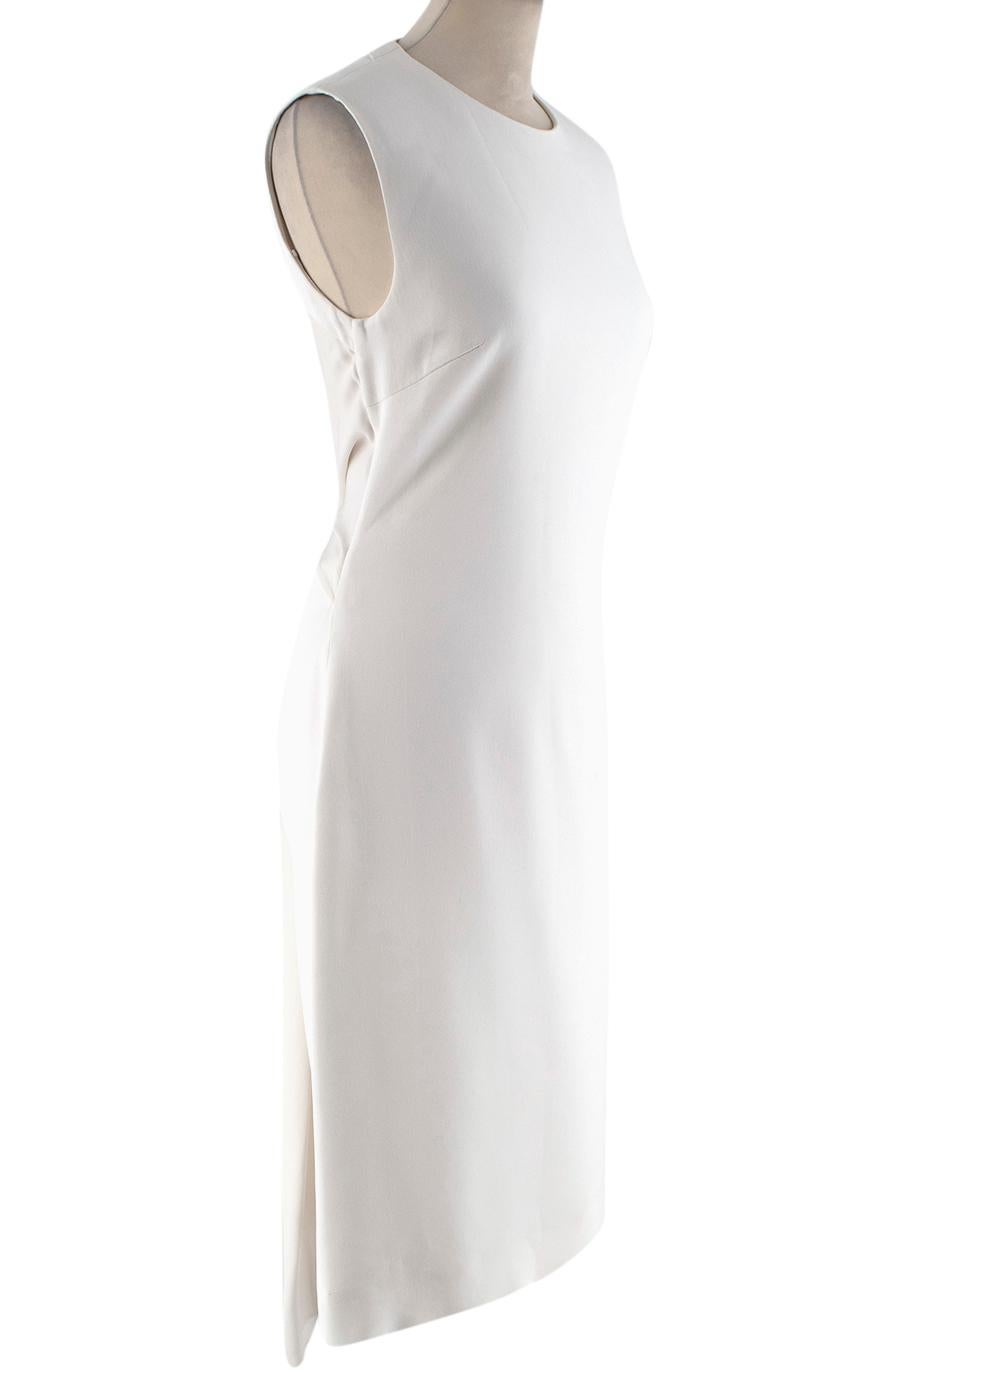 Givenchy Cream Sleeveless A-Line Tie-Back Midi Dress

- A-line silhouette 
- Midi-length 
- Crossover U-Back line 
- Darted front detailing 
- Silk tie-back belt
- Concealed shoulder zip, back zip and eyelet fastenings

Materials:
Main - 95%